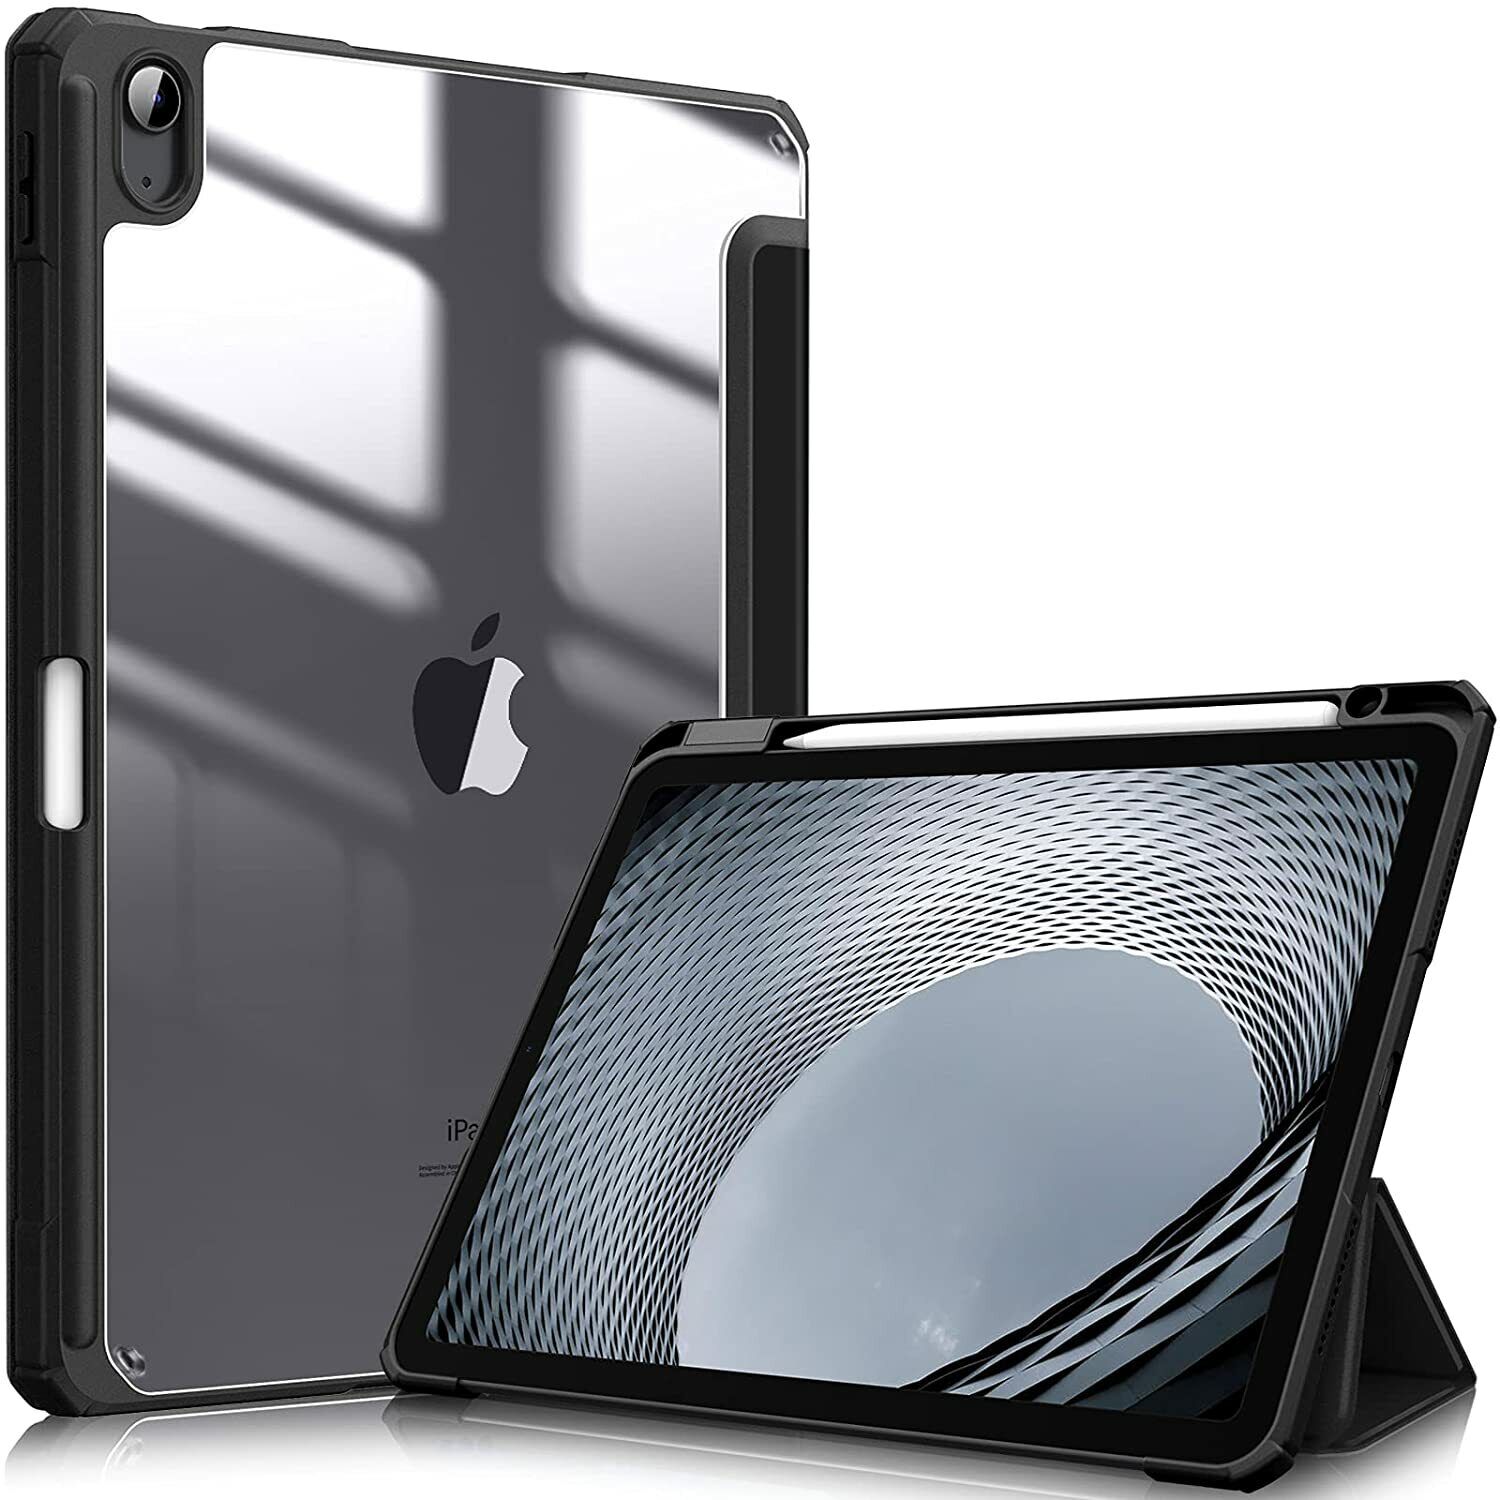 Slim Case for 10.9'' iPad Air 4th Gen 2020 Shockproof Cover with Auto Wake/Sleep